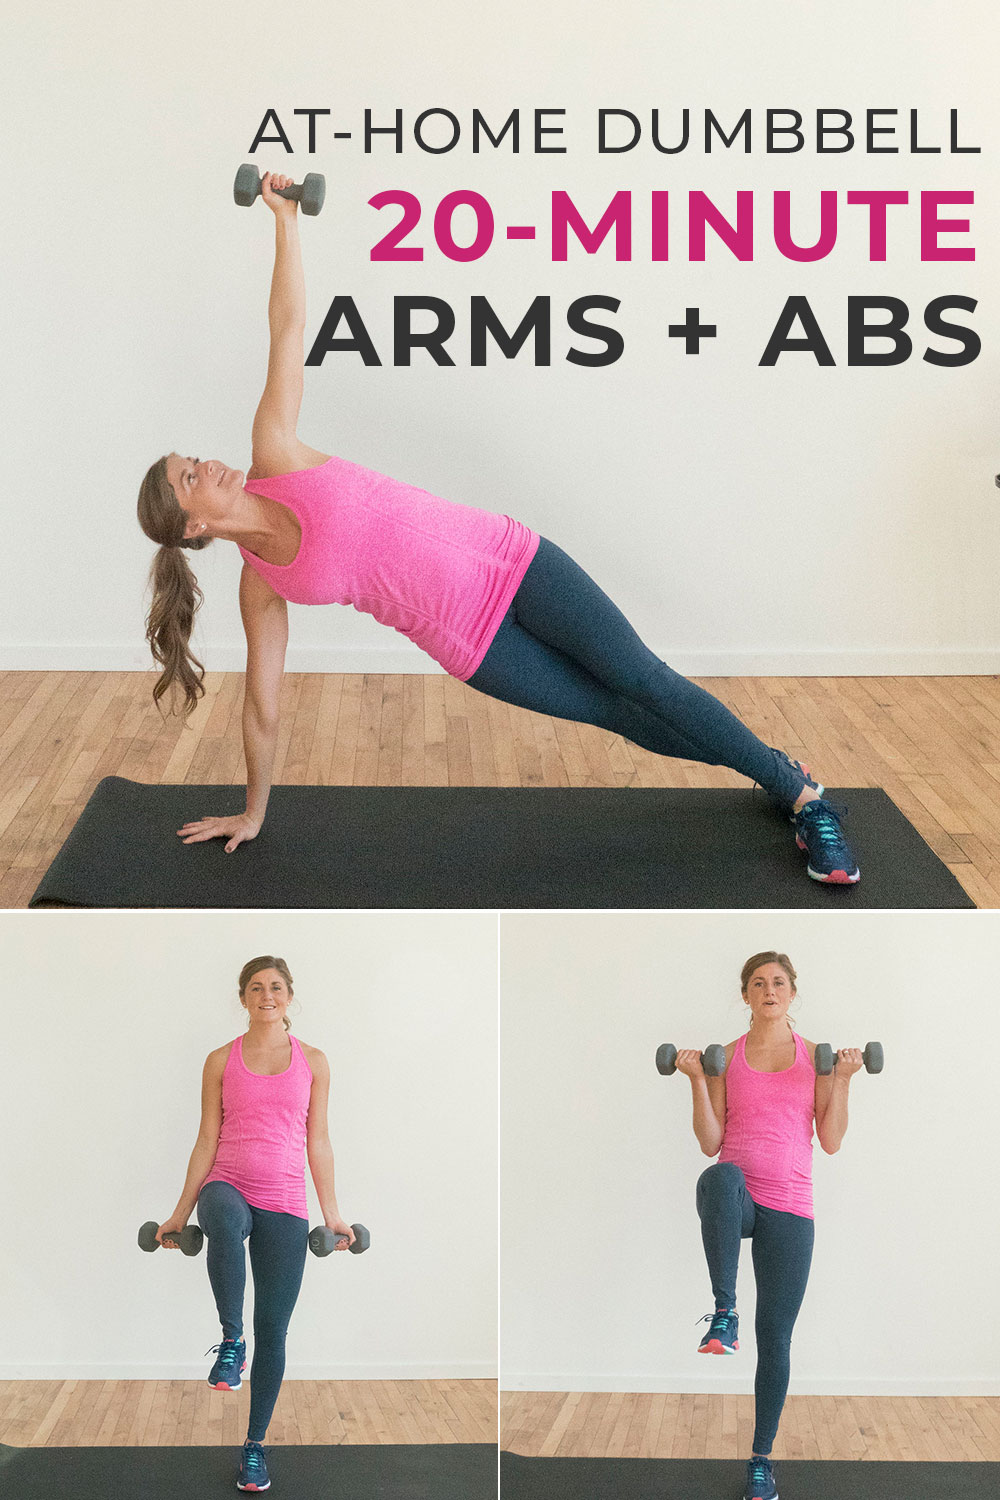 arms + abs dumbbell burnout: 8 exercises to tone up | nourish move love